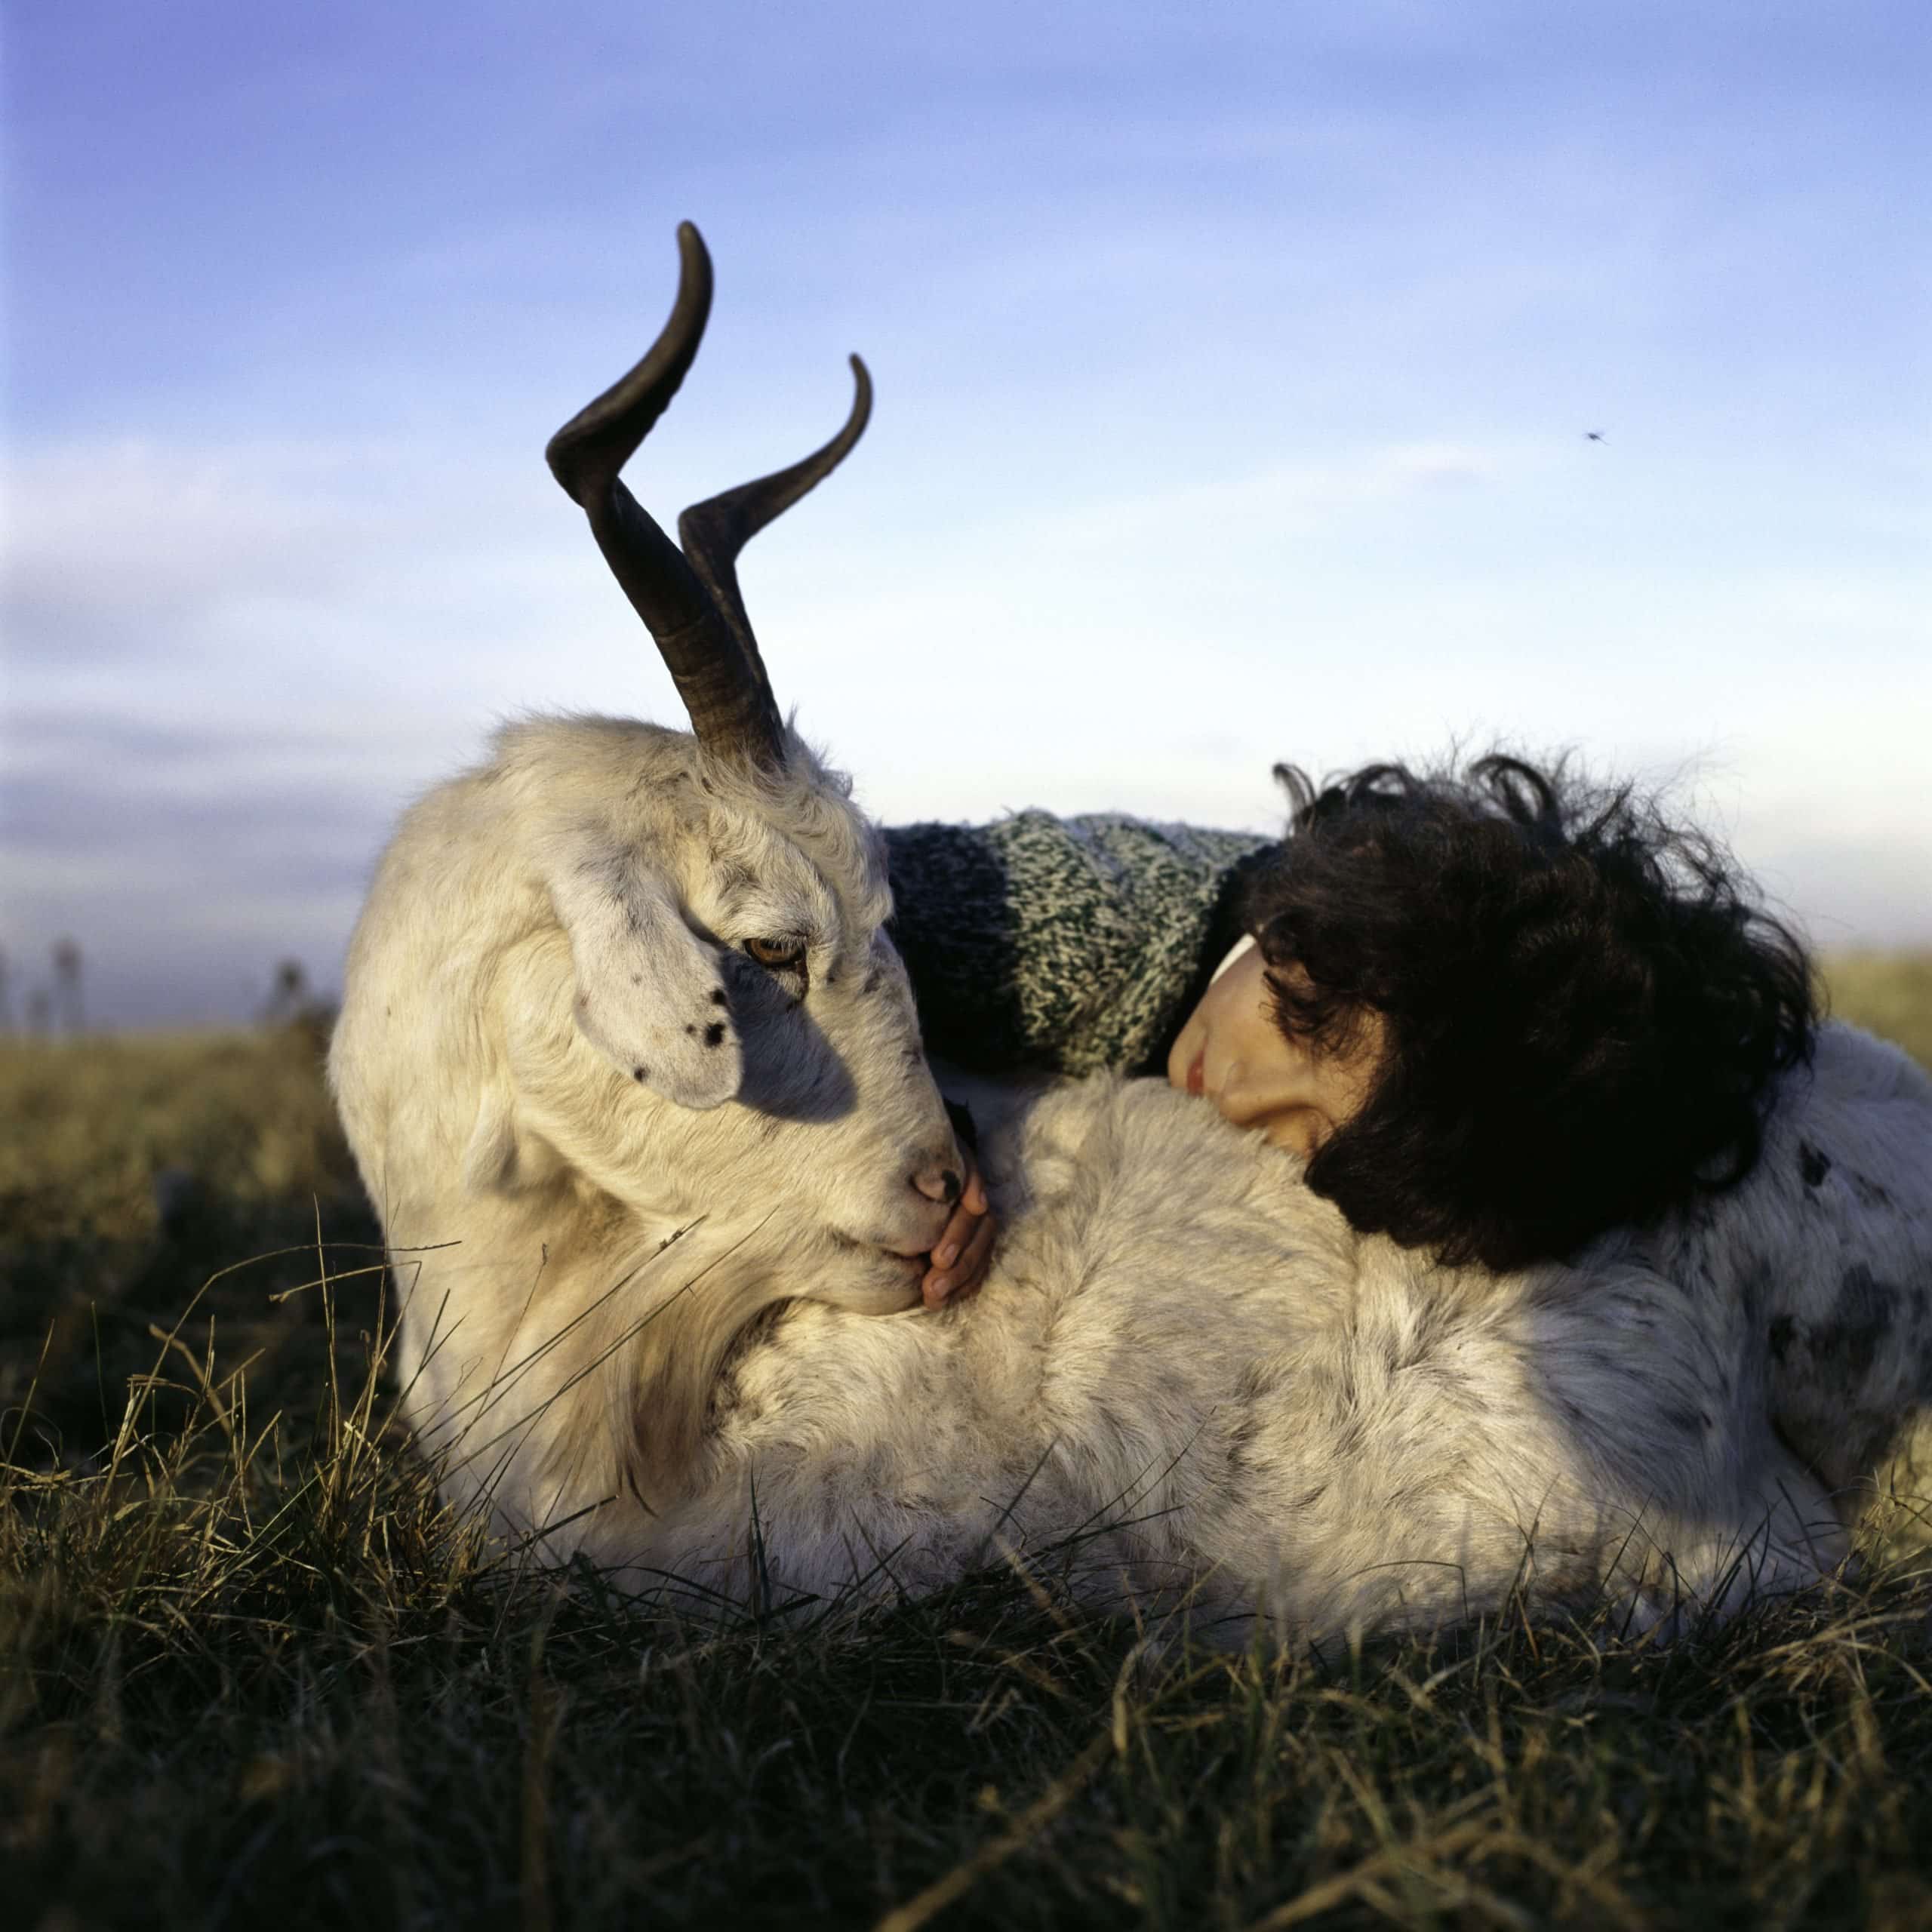 image of a girl taking care of a goat on a field by Alessandra Sanguinetti